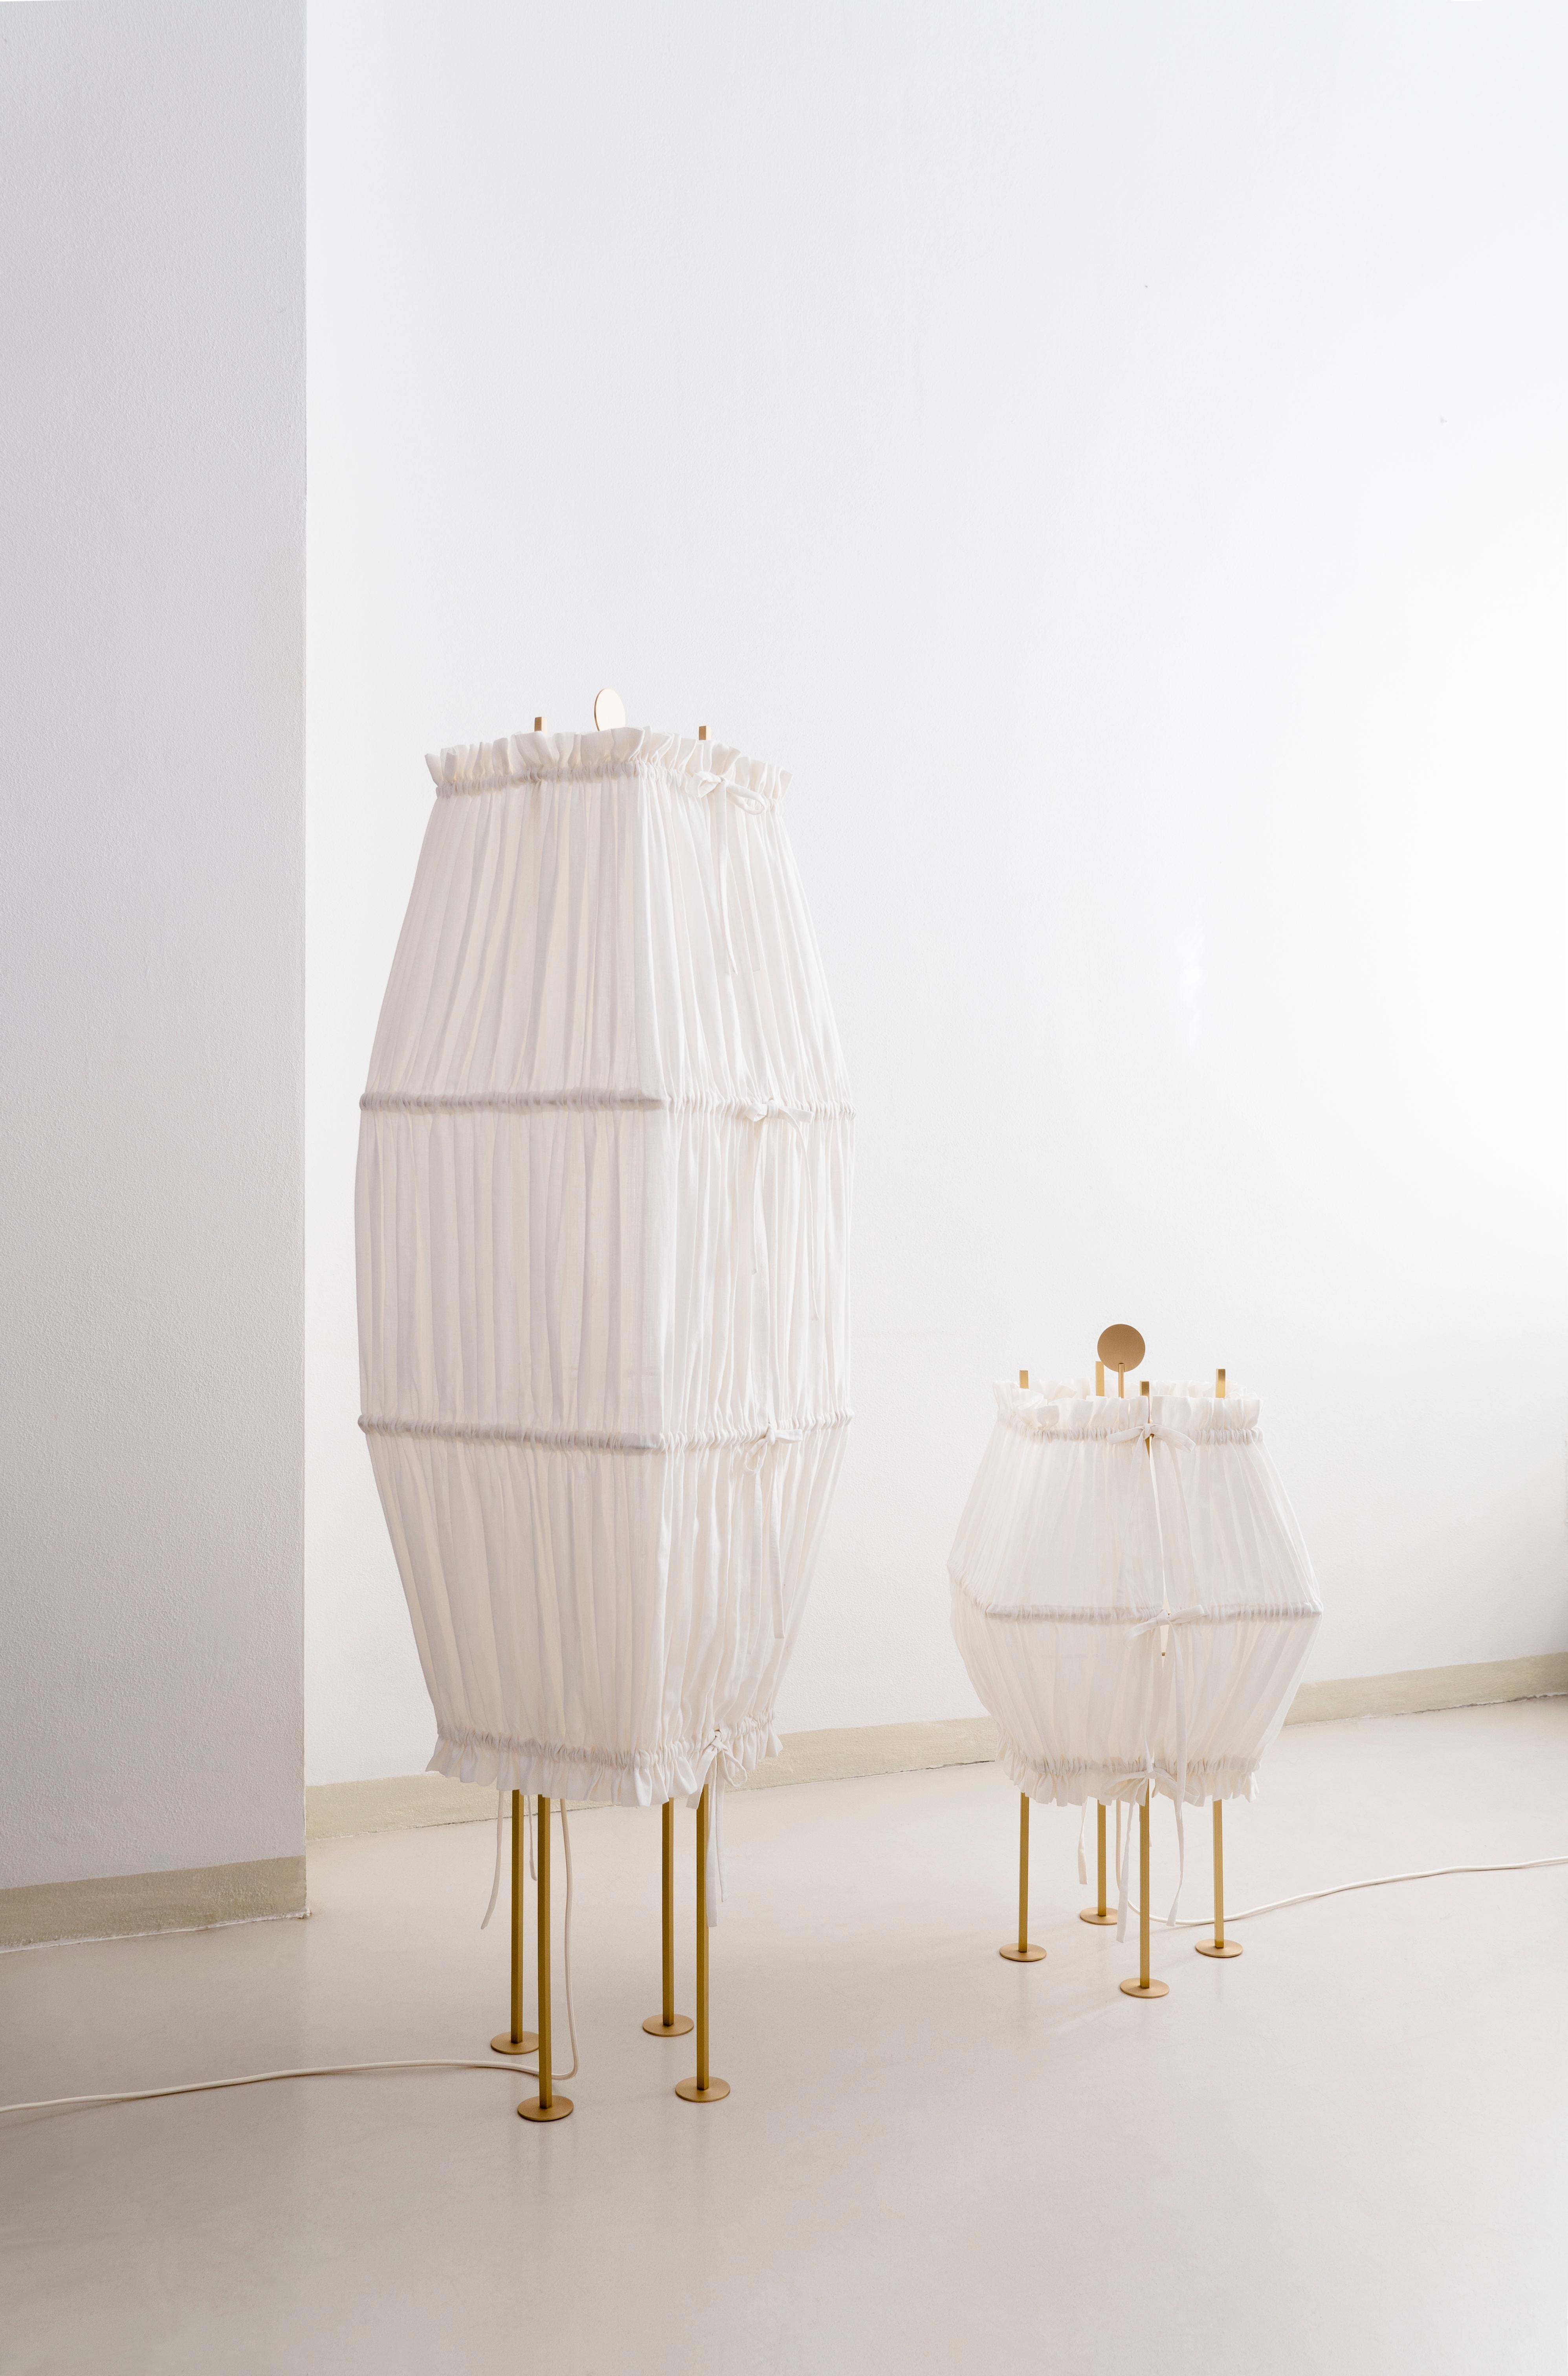 Set of 2 Presenza floor lamps by Agustina Bottoni.
Materials: hemp fabric (GOTS organic certification), satin-finish solid brass, LED lighting
Dimensions: W 42 x D 42 x H 150 cm (large) and W 42 x D 42 x H 75 cm (medium).

PRESENZA
A pair of